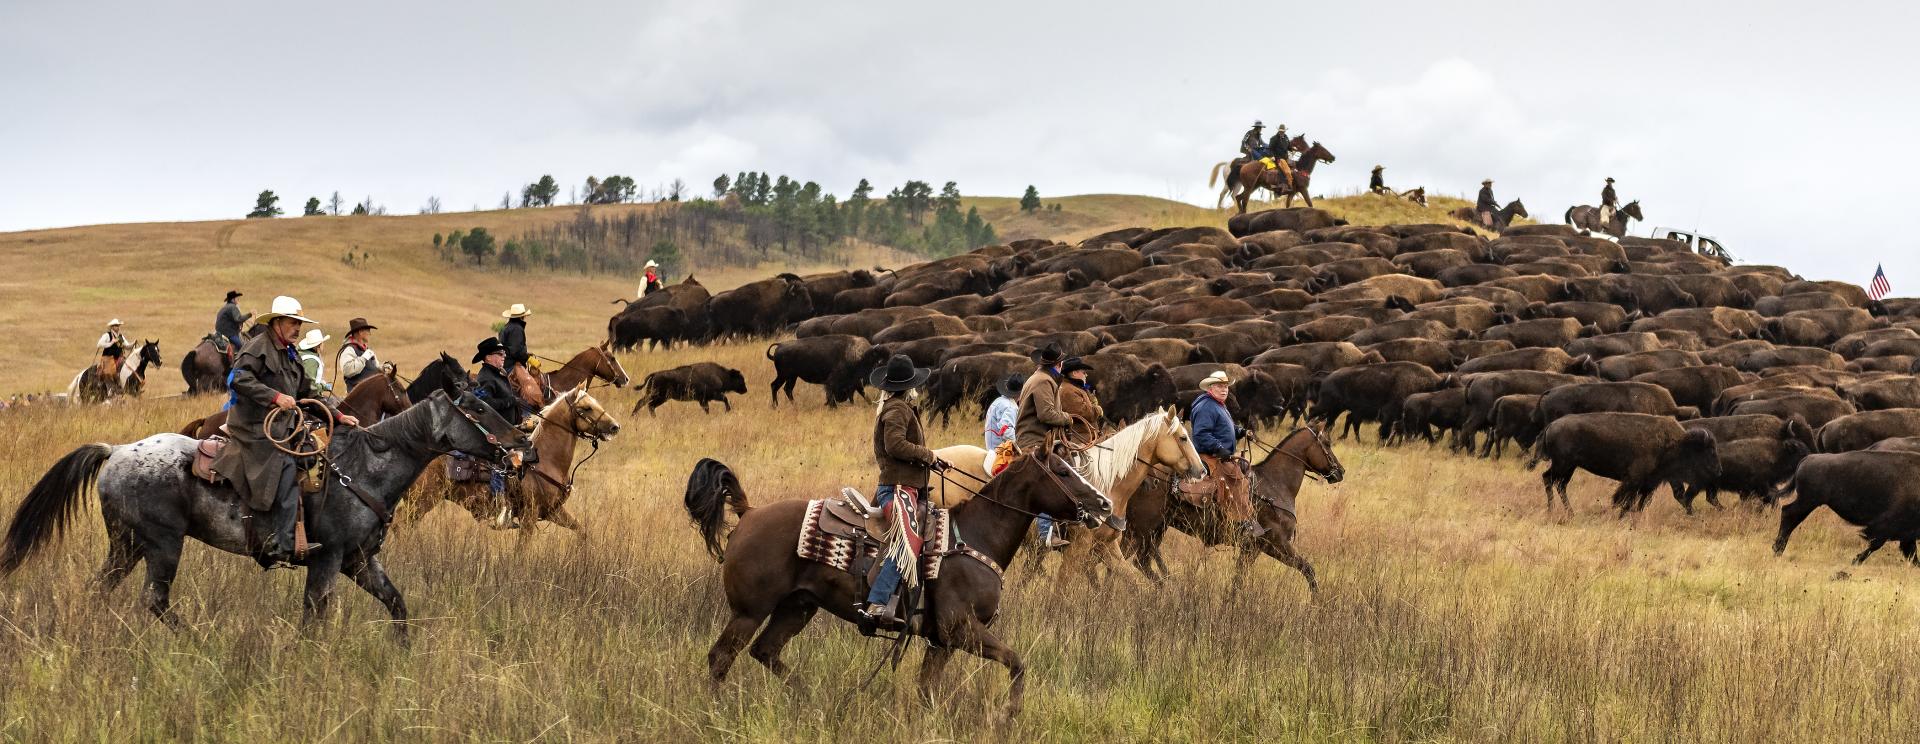 The Best Fall Festivities in the Black Hills and Badlands